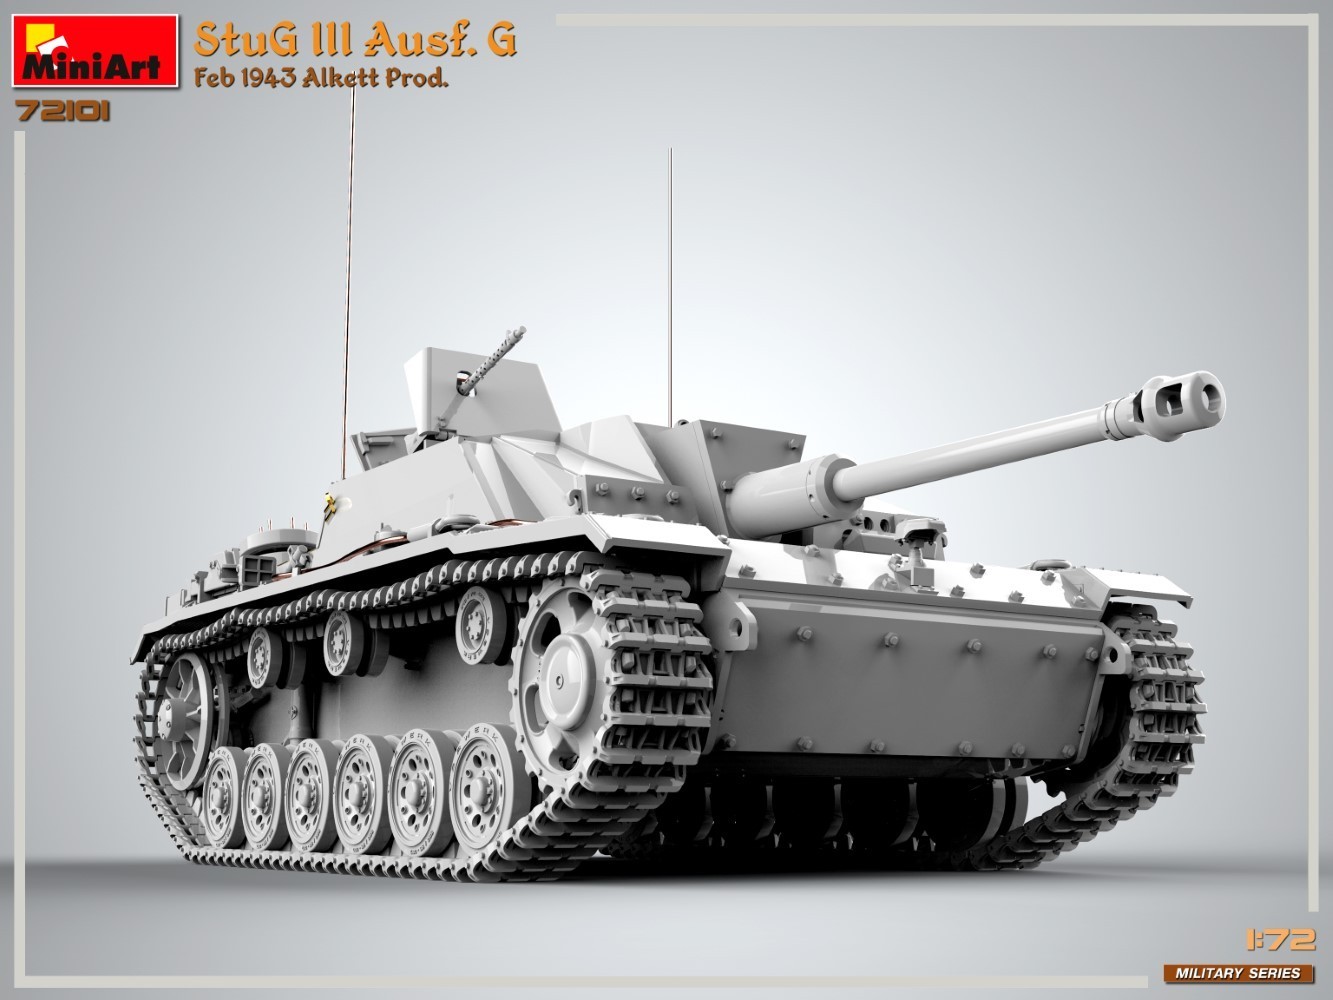 New Military Series Announced in 1/72 Scale, Starting with StuG III Ausf. G CAD-6